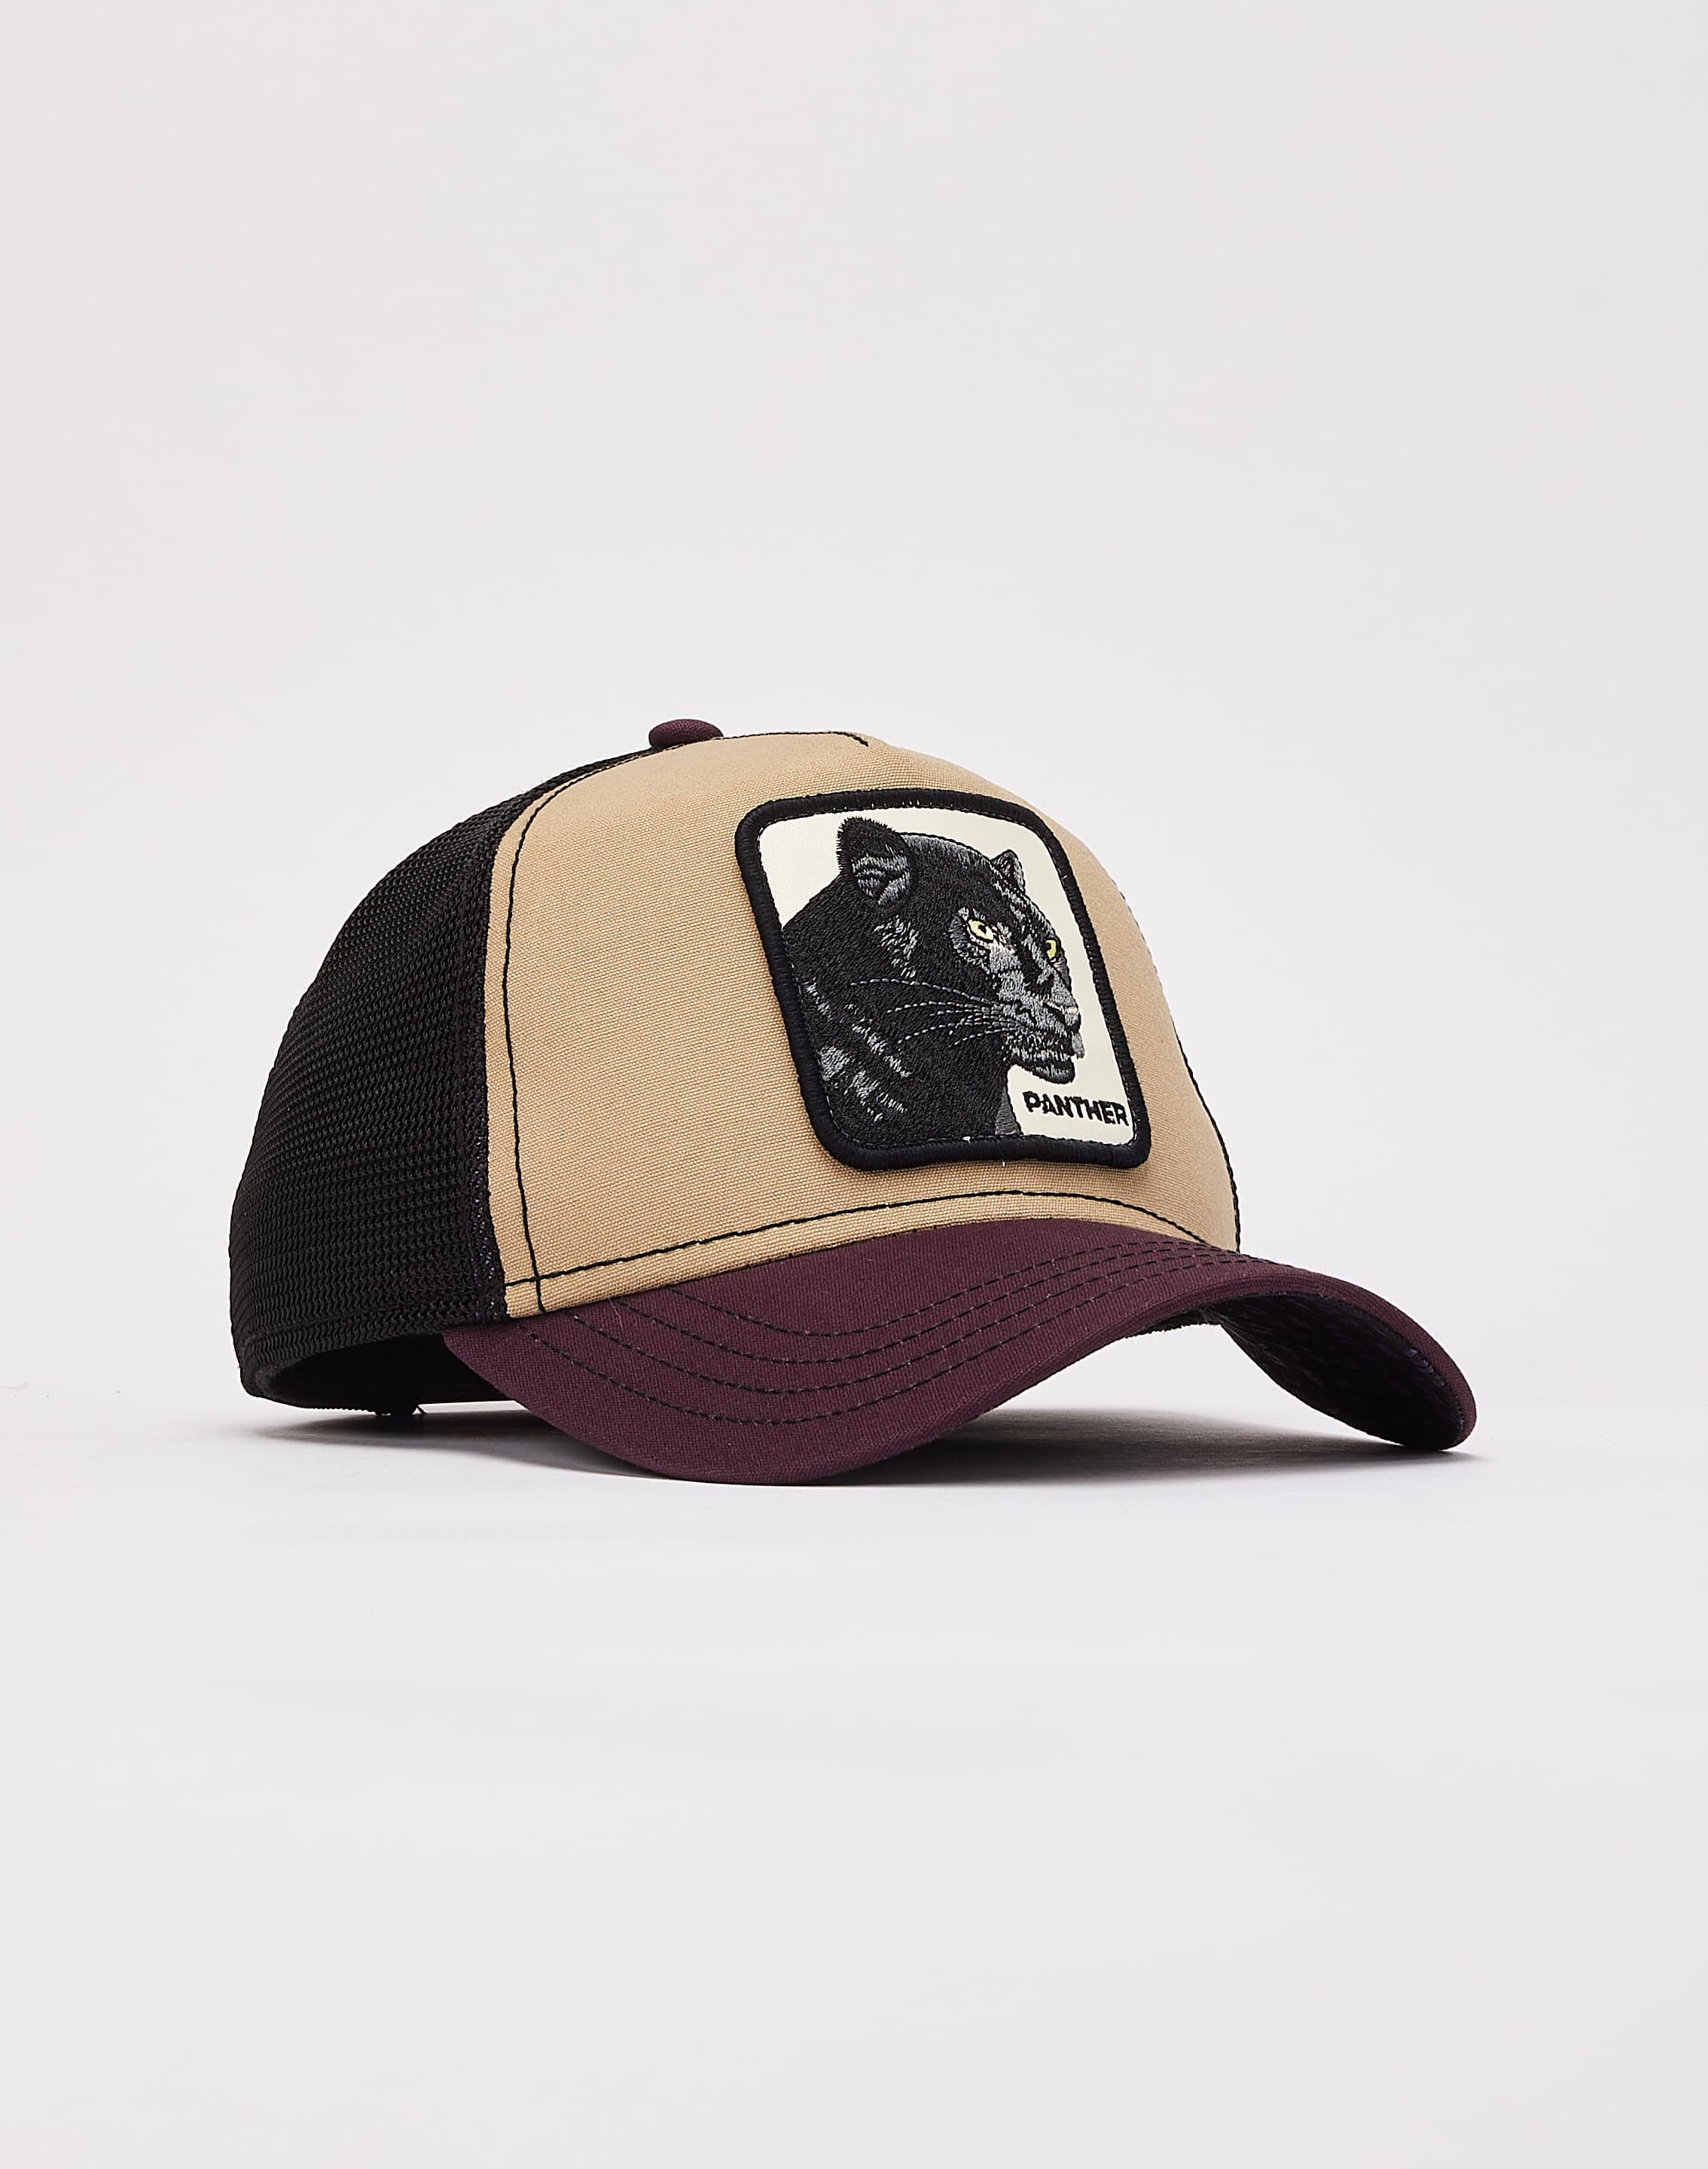 The Panther GOORIN BROS. Trucker Cap, Fast Shipping